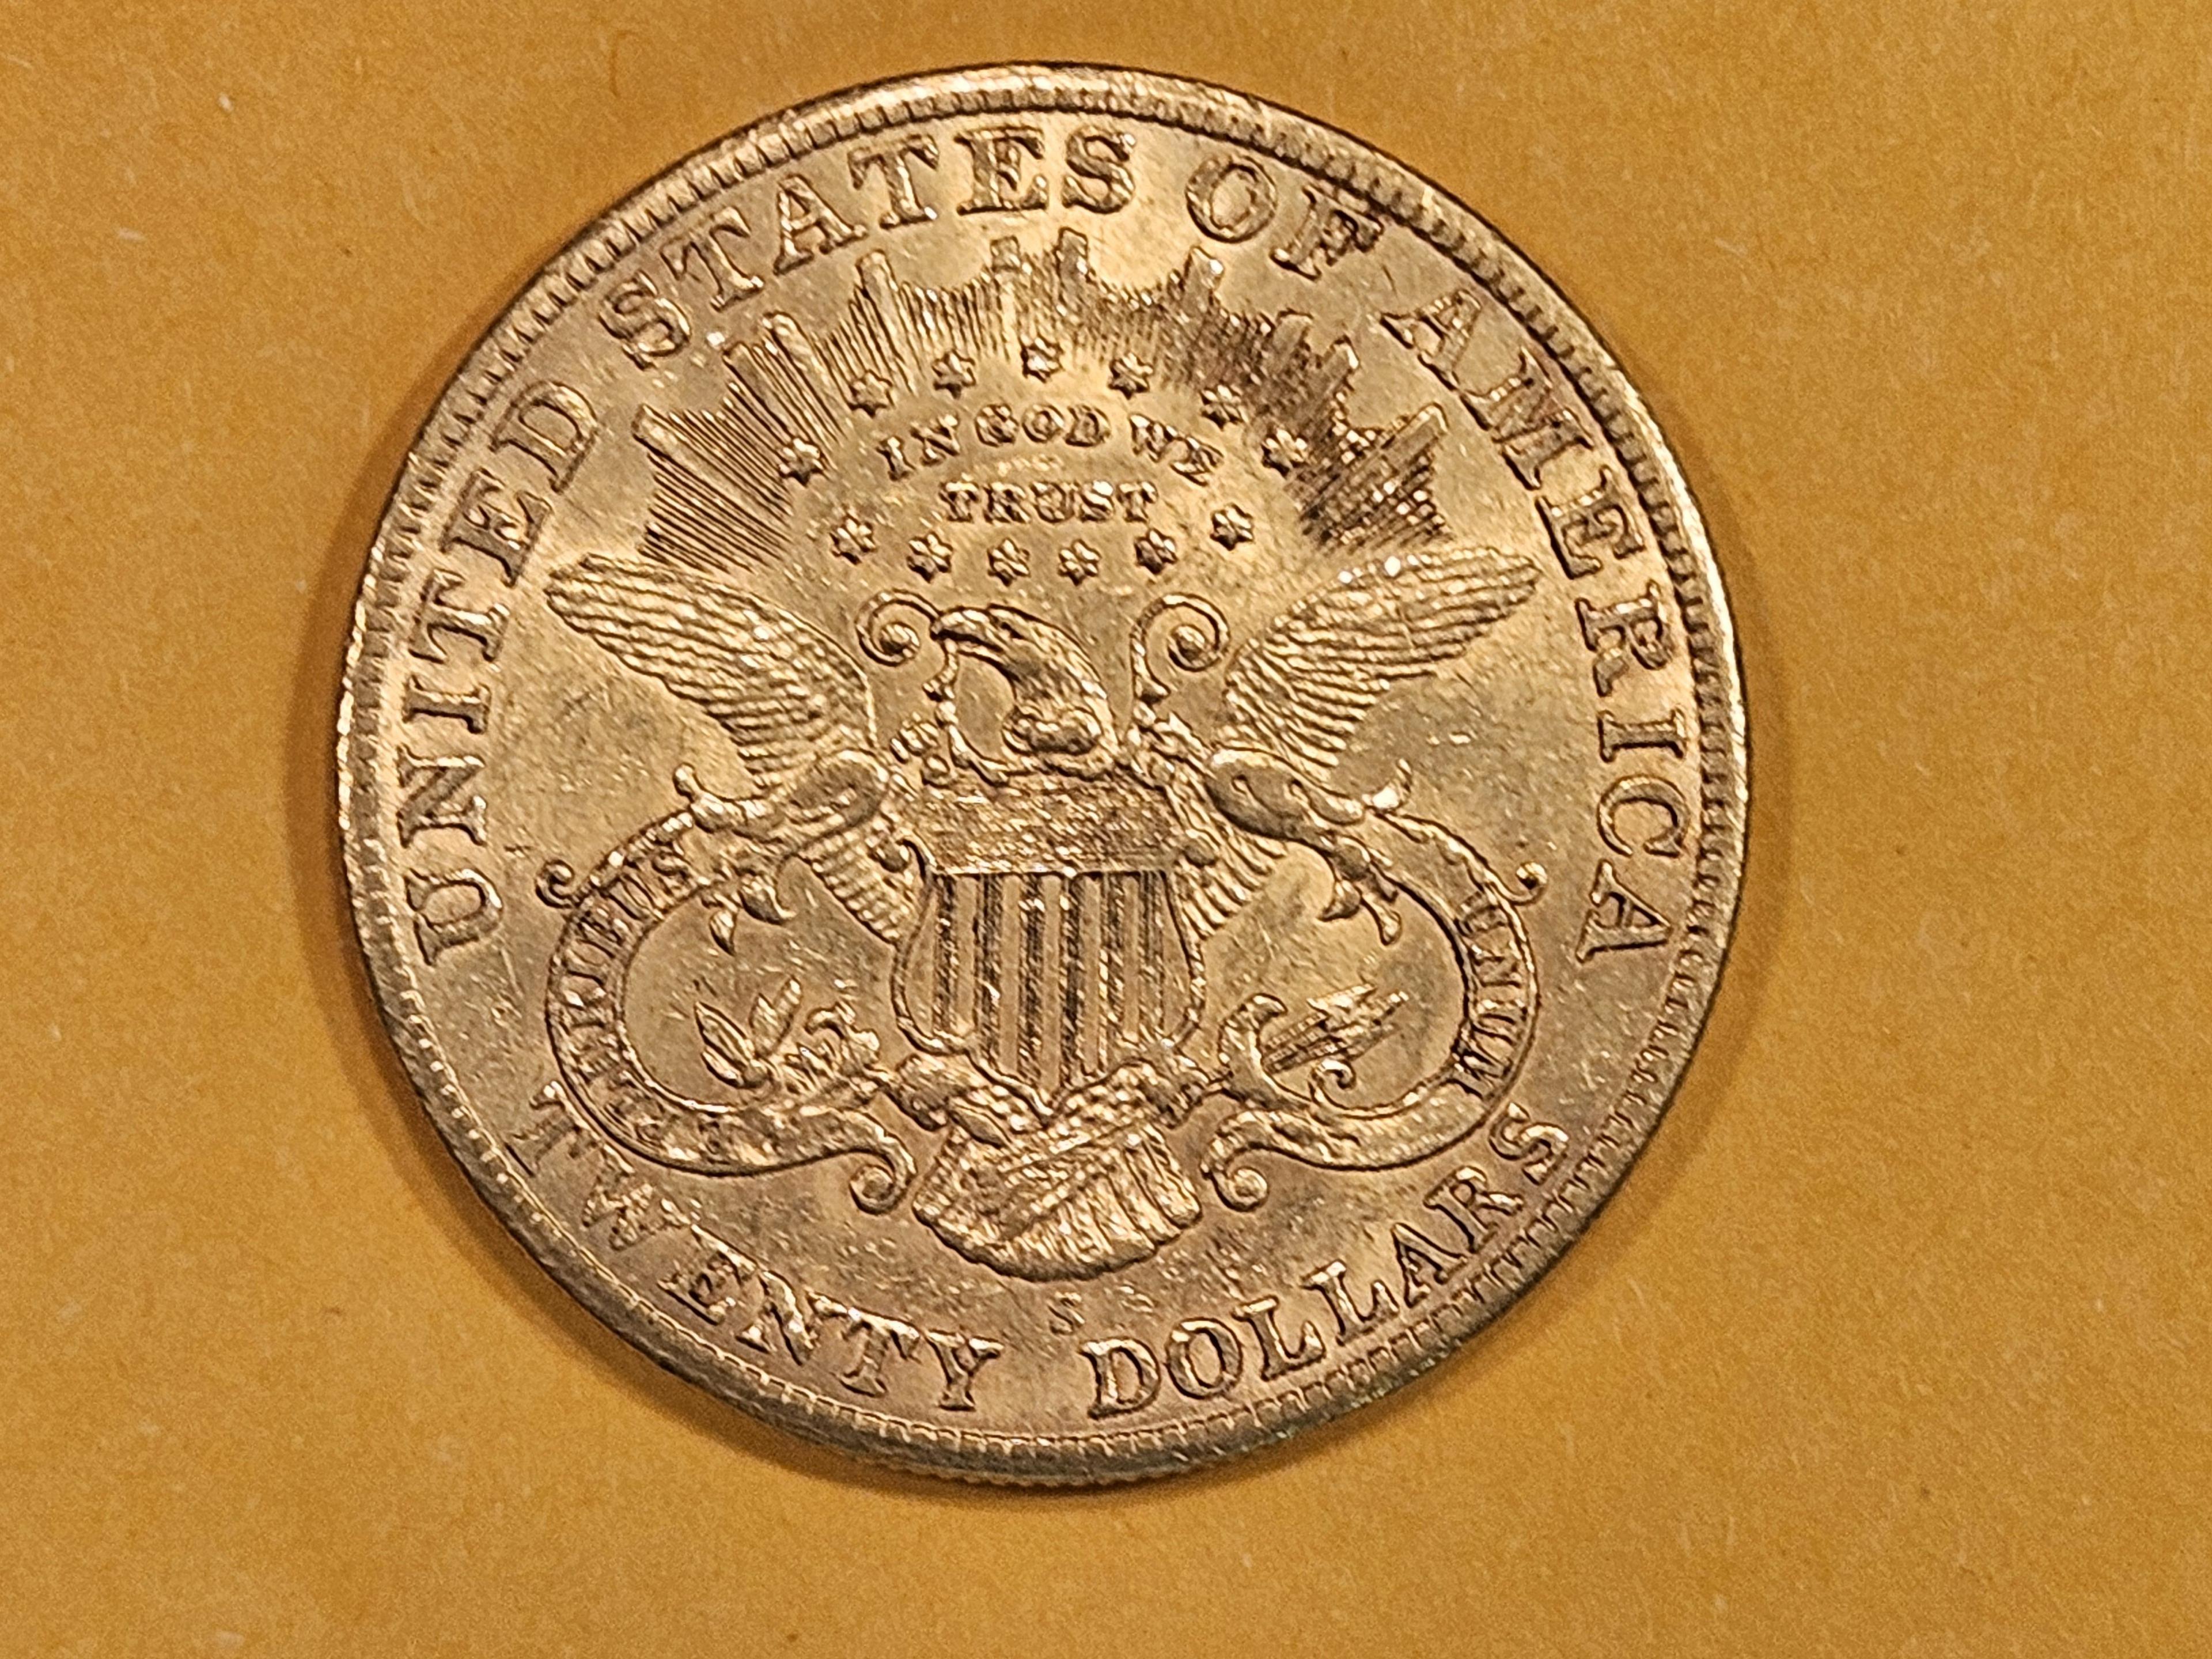 GOLD! Brilliant About Uncirculated plus 1902-S Liberty Head Gold Twenty Dollars